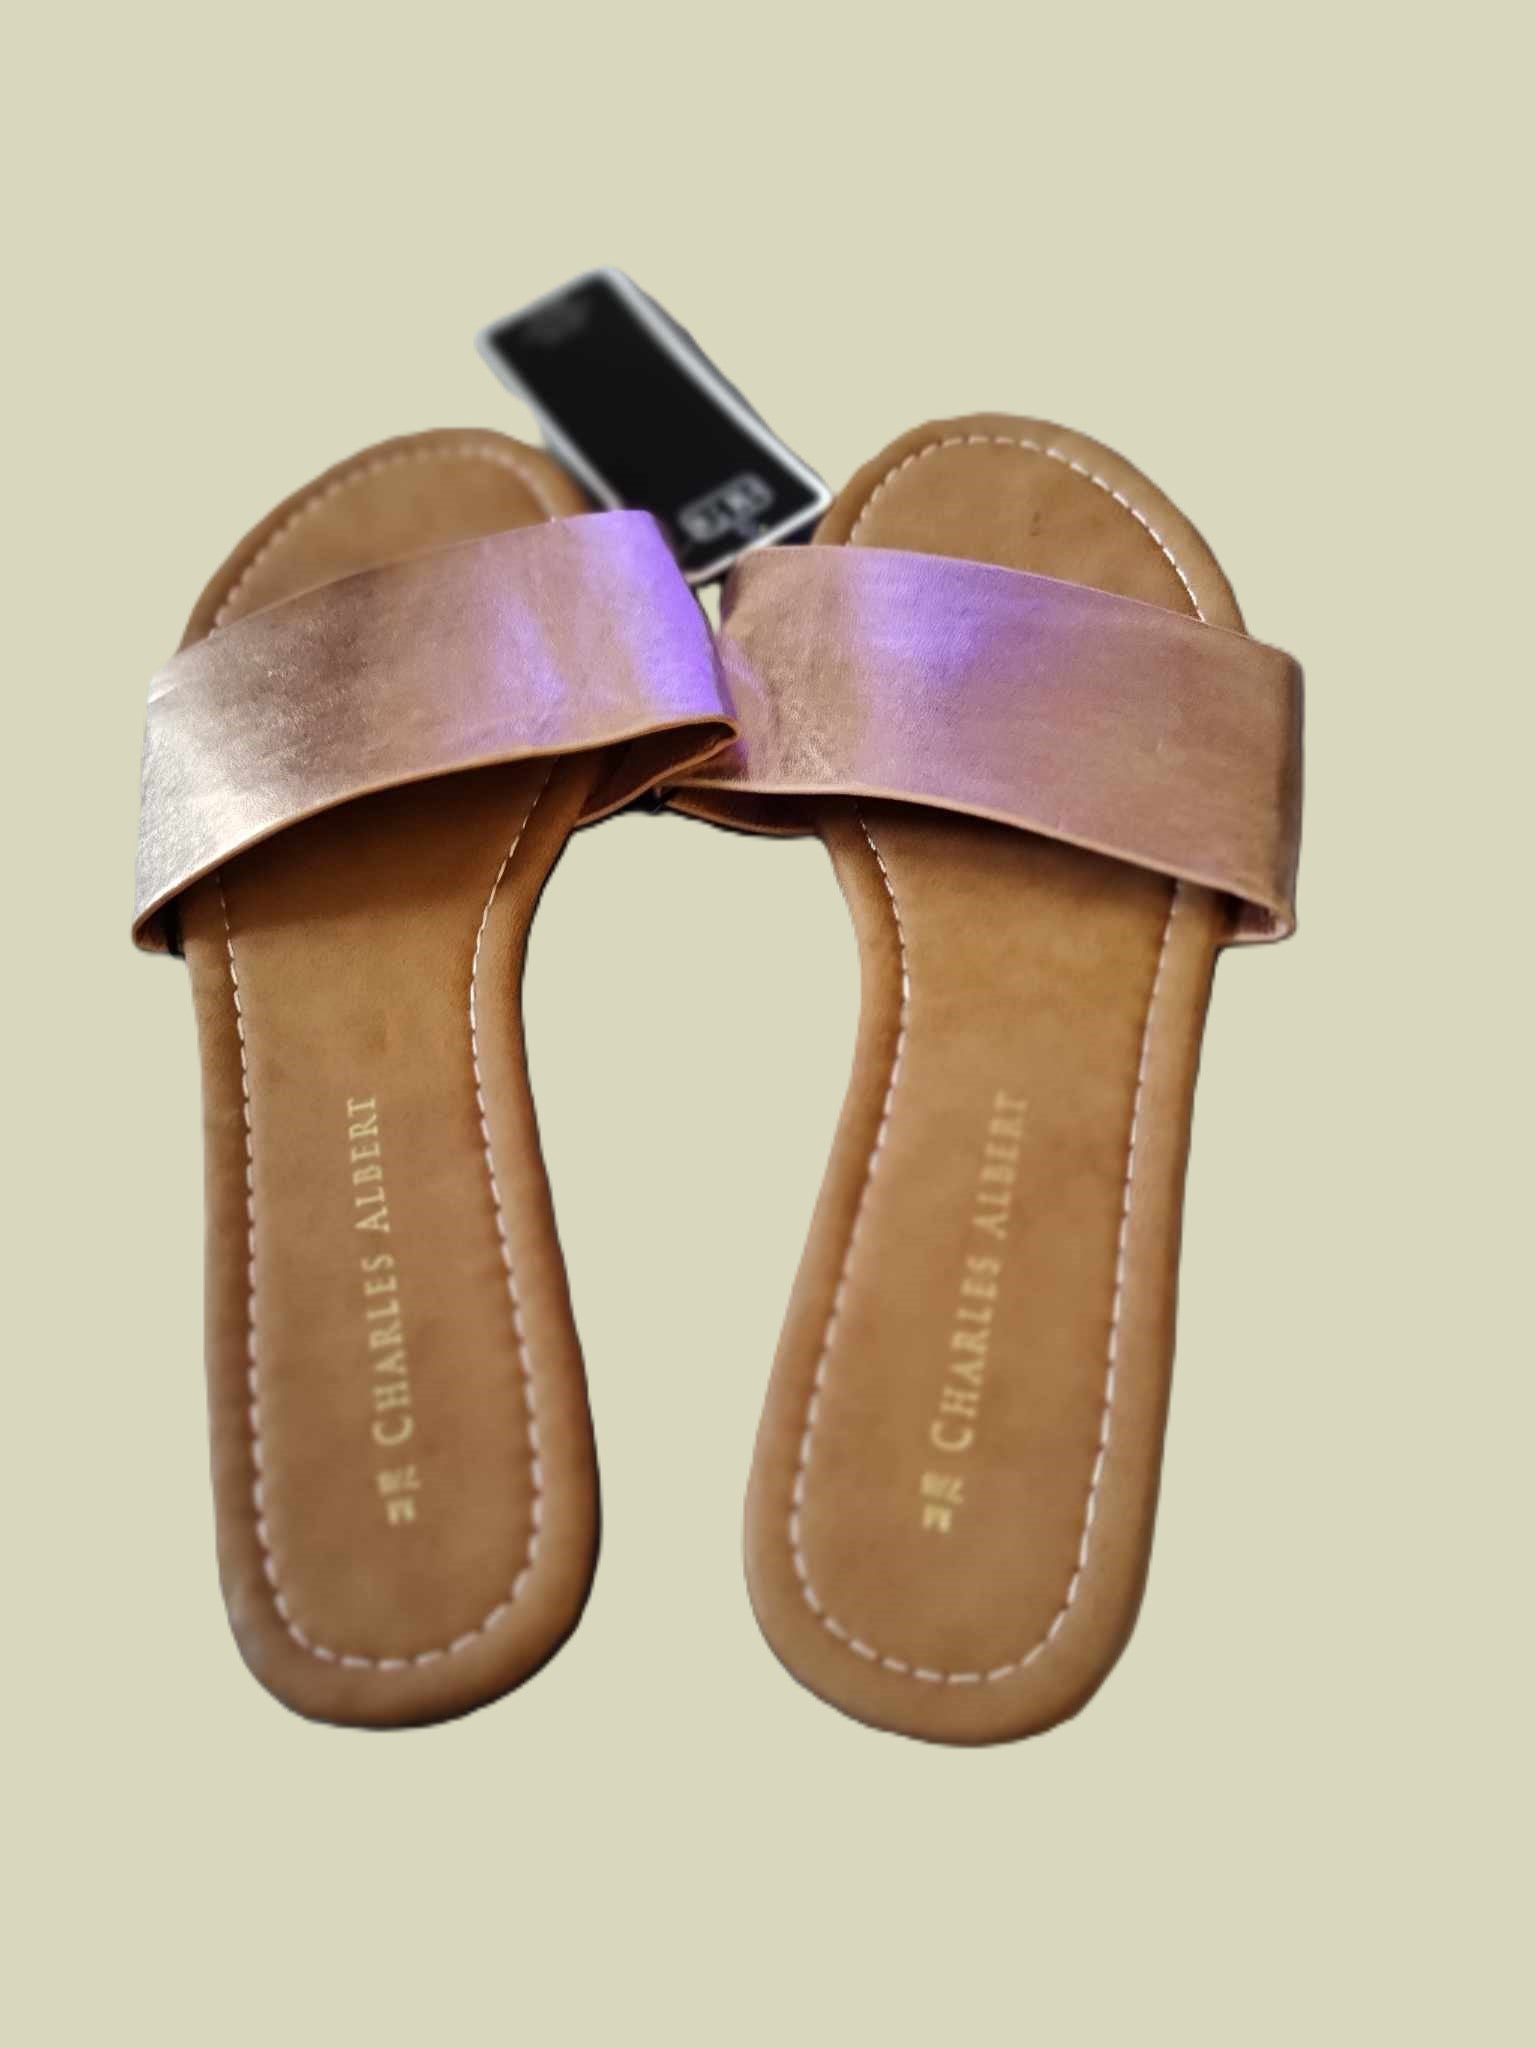 Women's Reflective Gold Flat Bottom Sandals Slides - new with tags